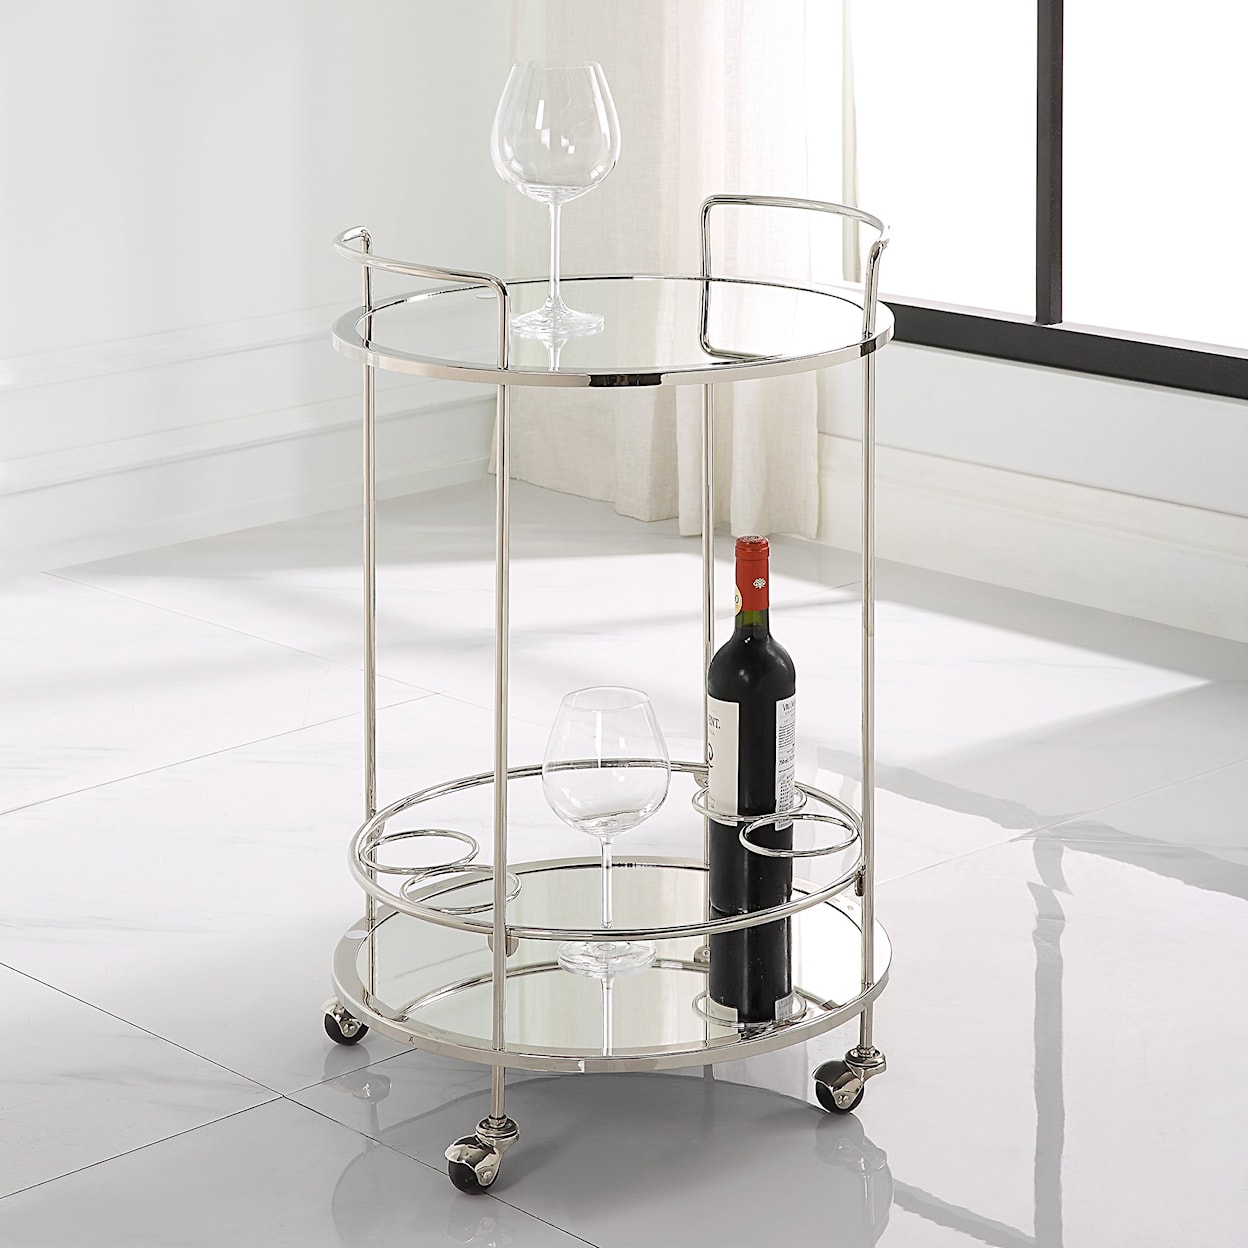 Uttermost Spritz Chrome Bar Cart with Casters